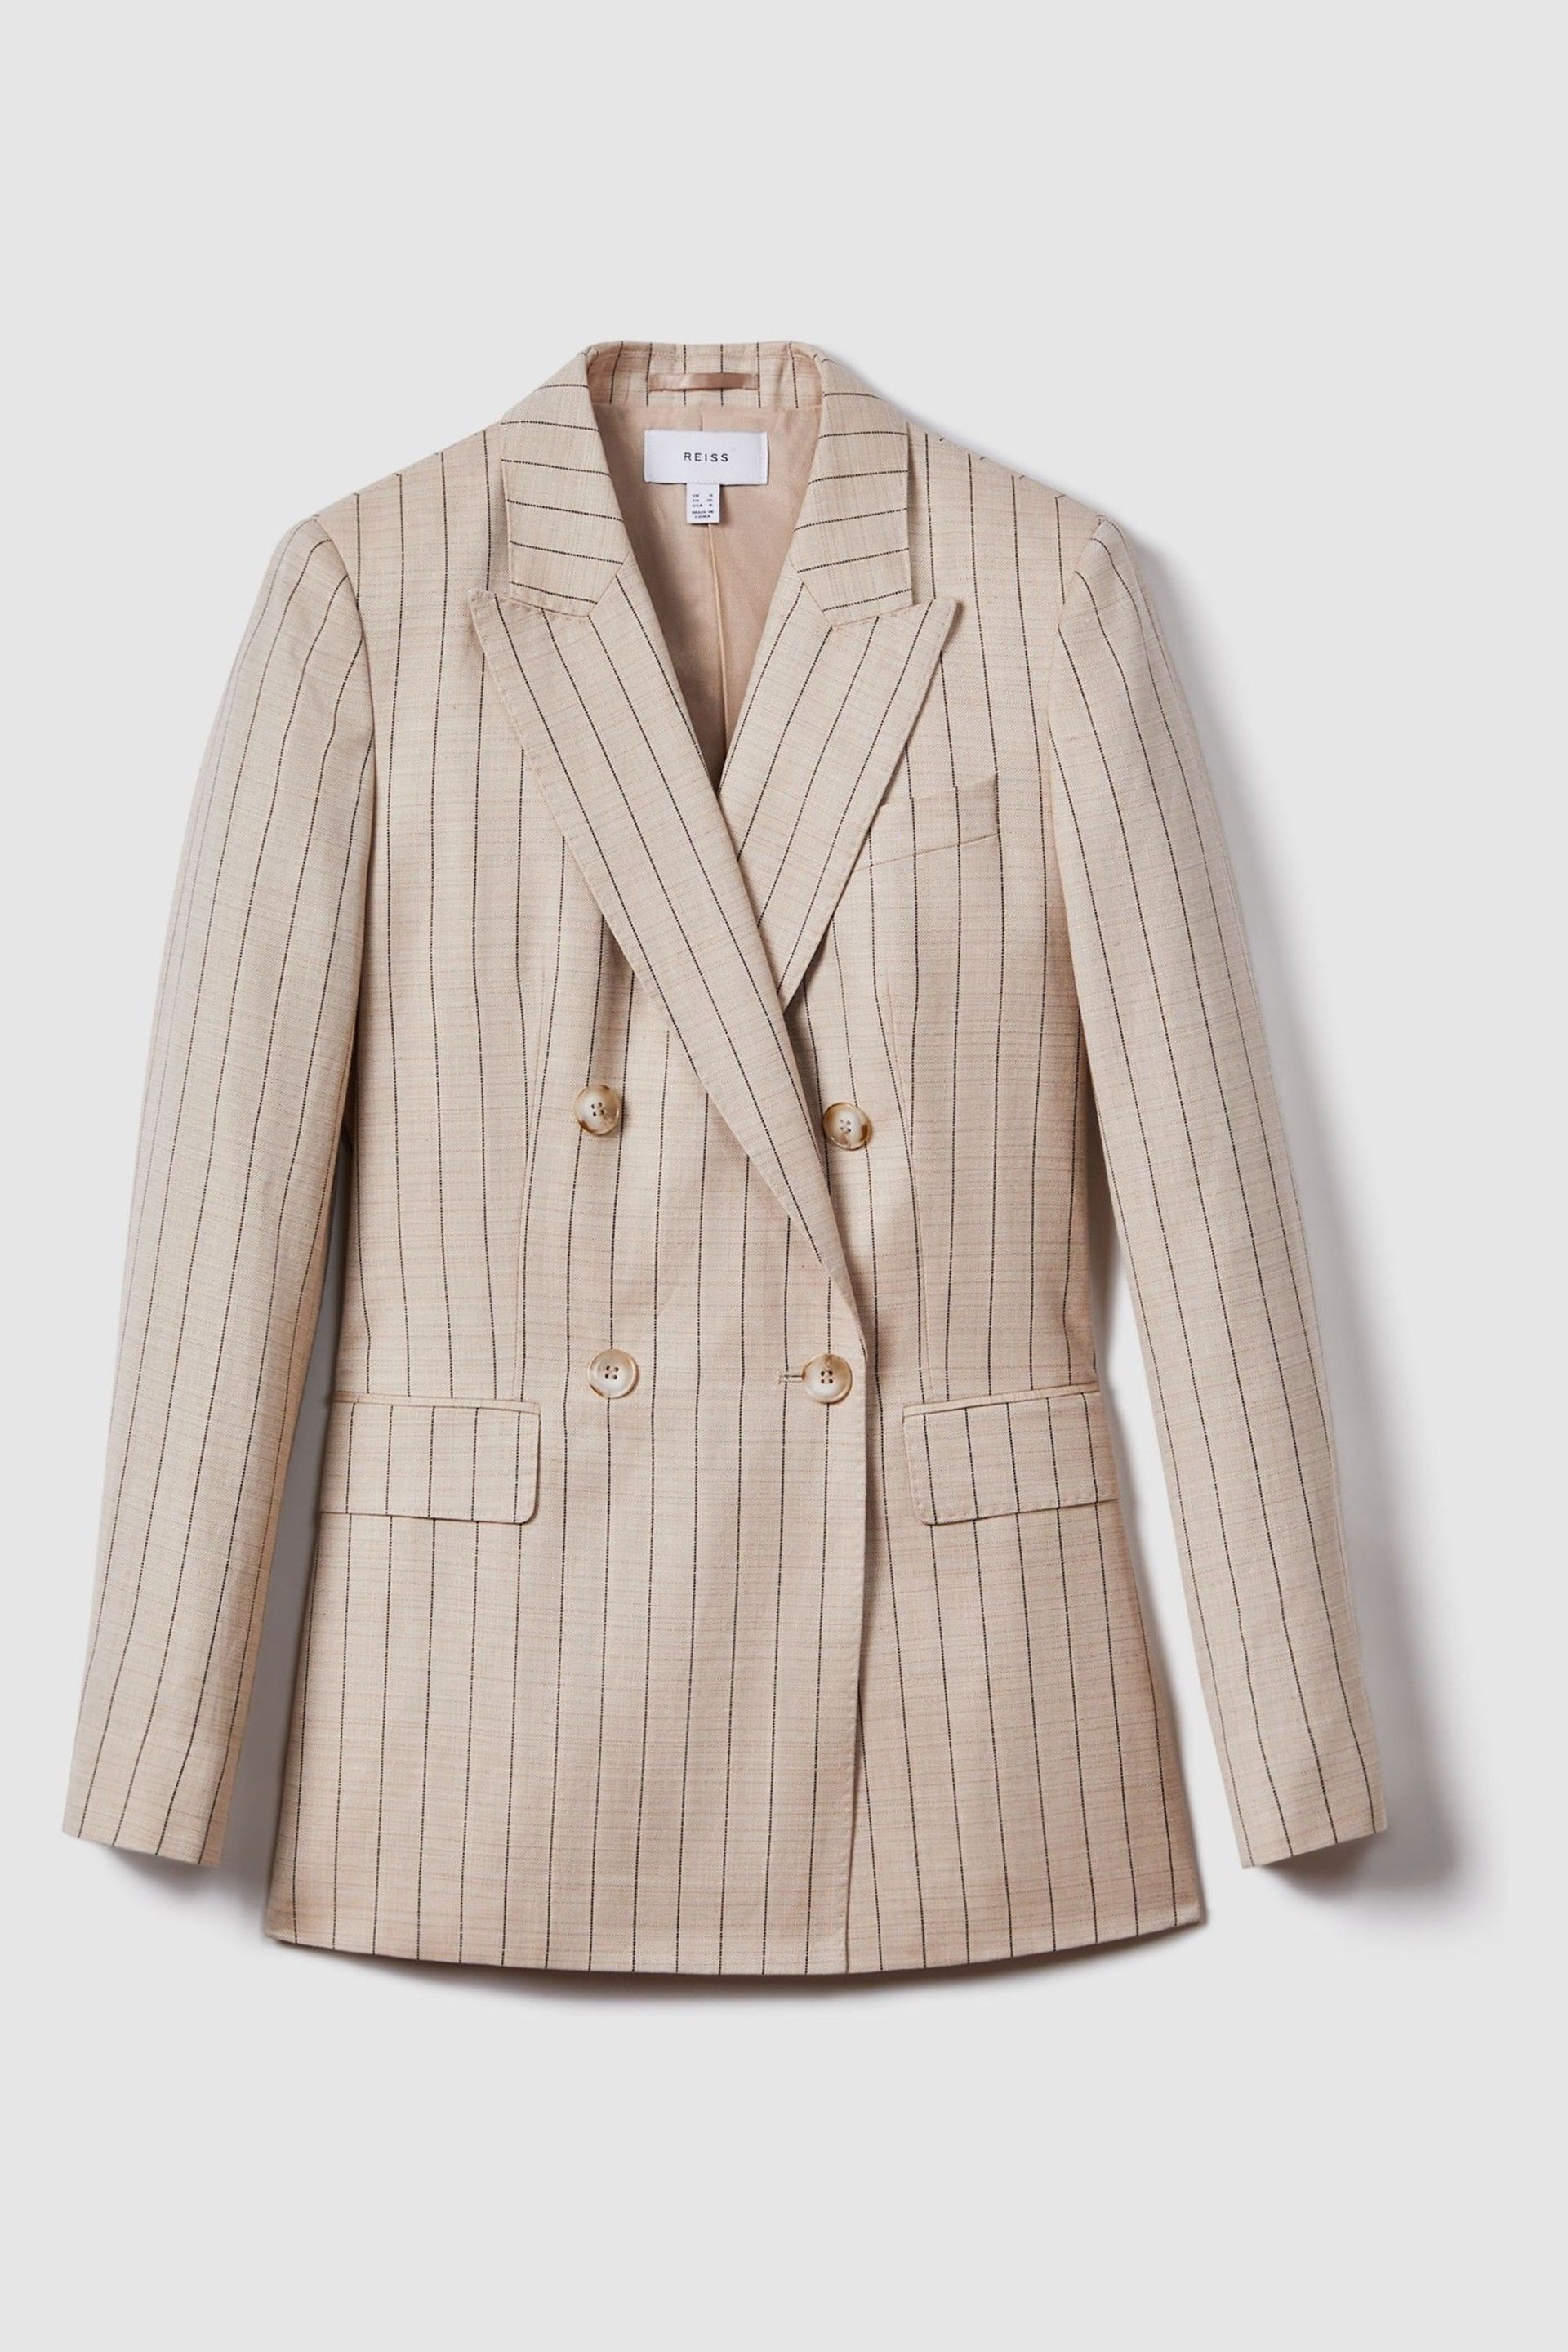 Reiss Neutral Odette Wool Blend Striped Double Breasted Blazer - Image 2 of 6